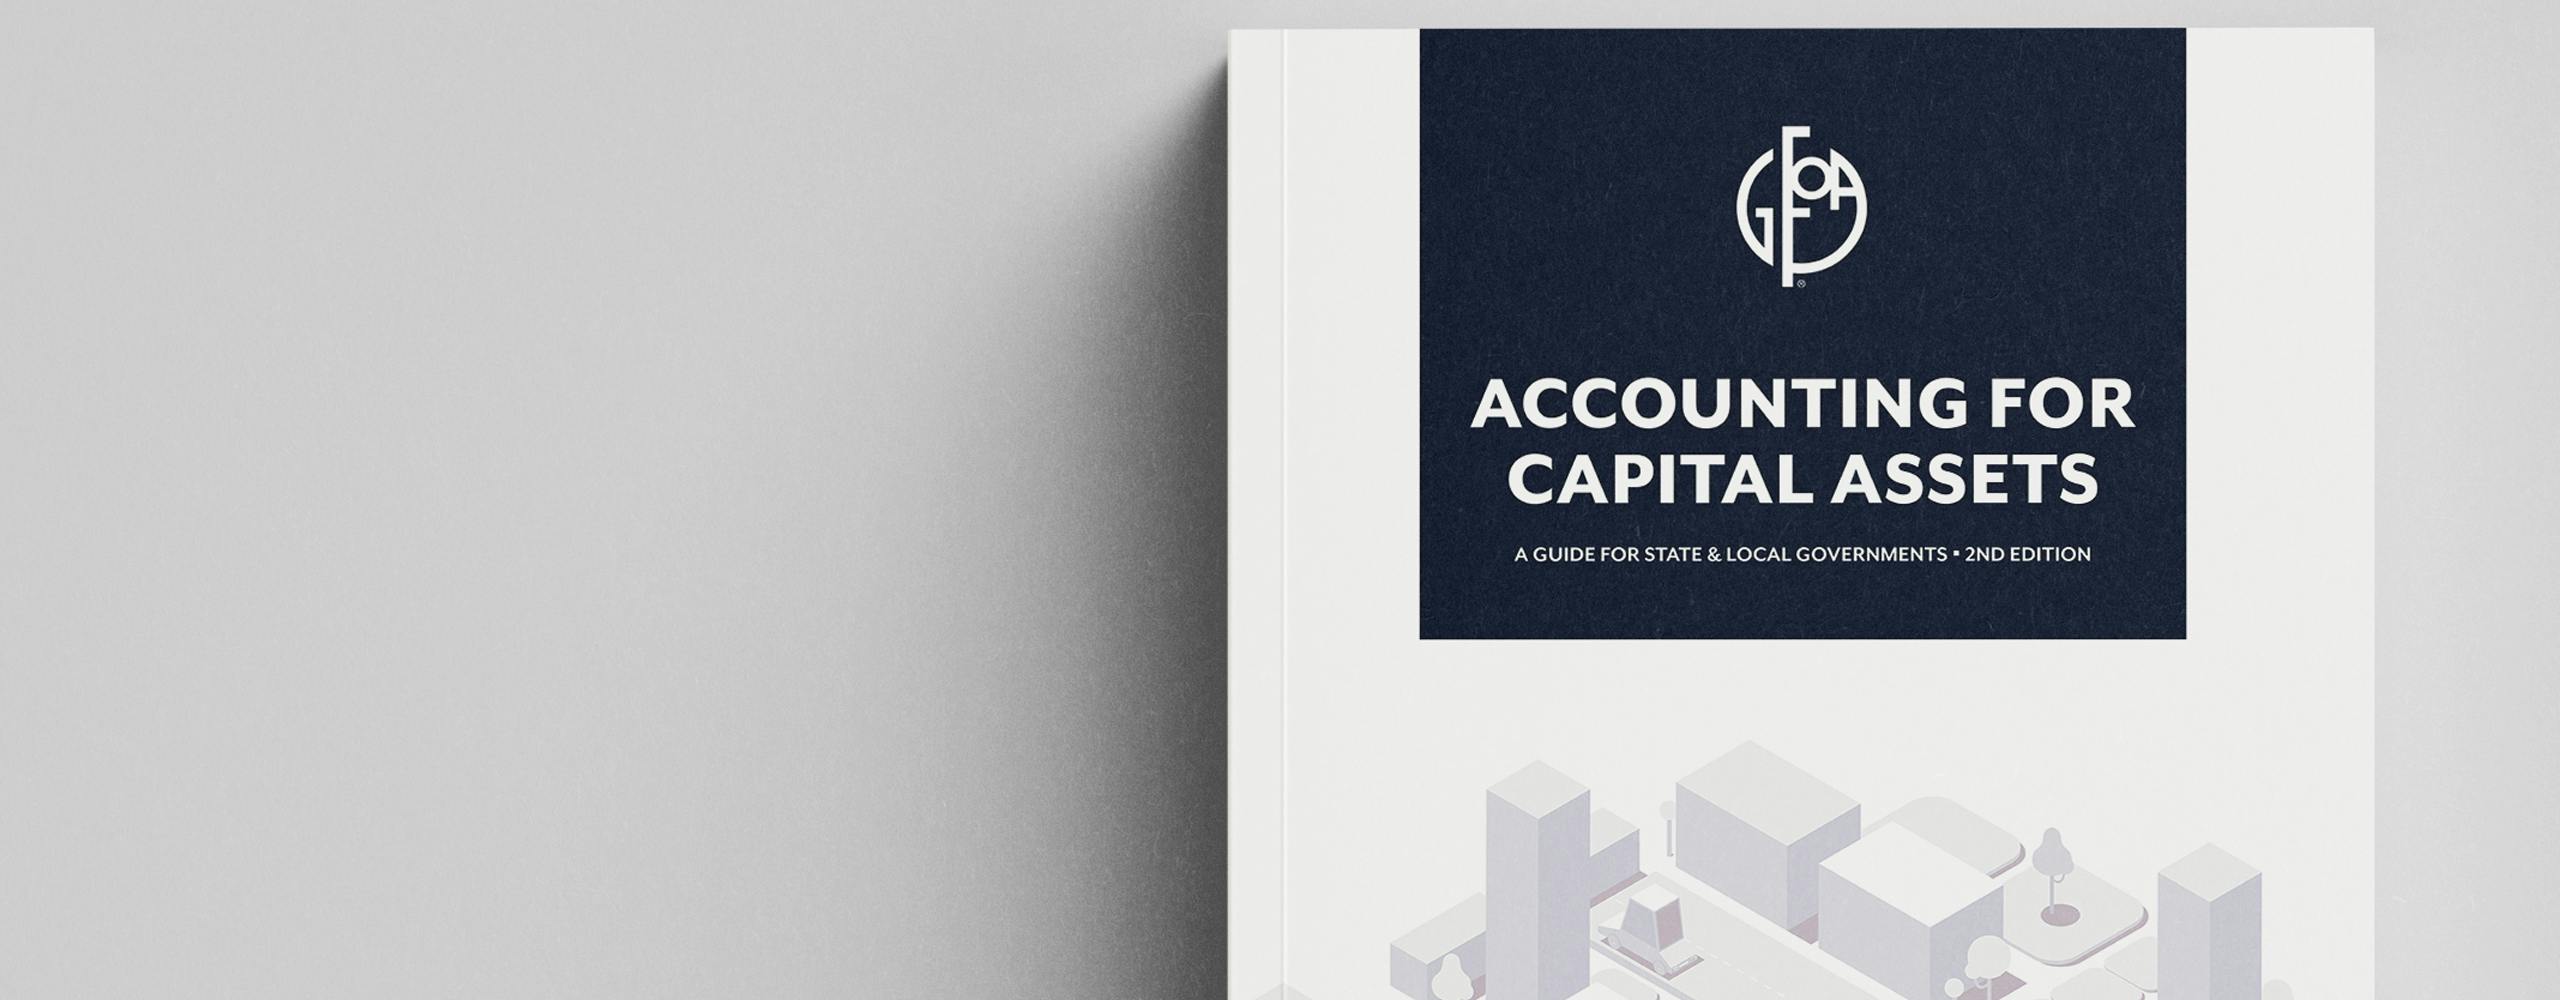 Photo of Accounting for Capital Assets book cover. 